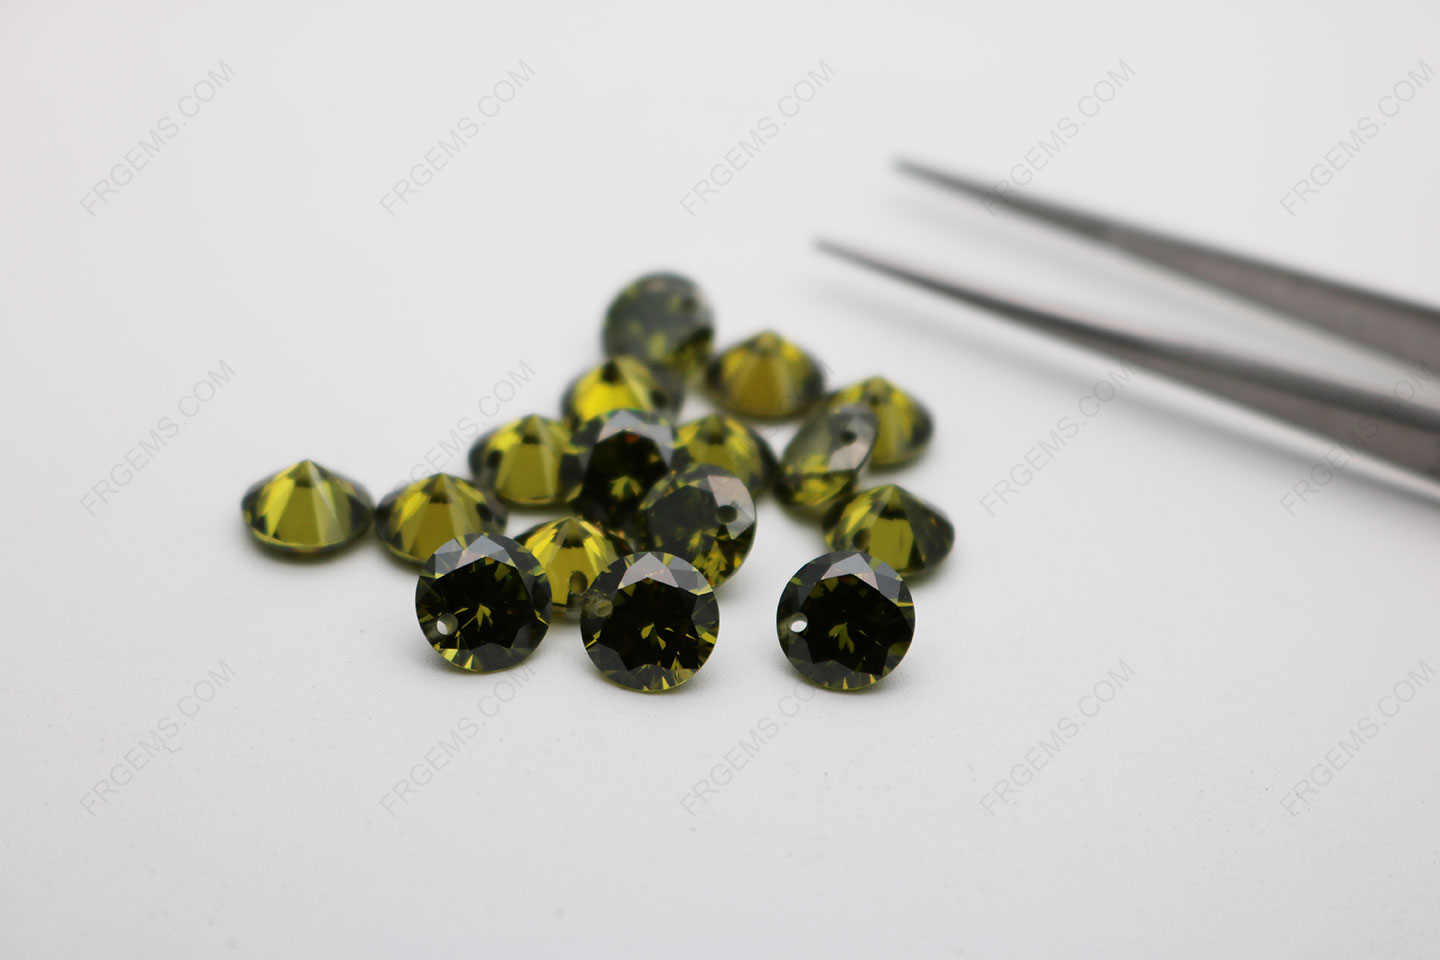 Cubic Zirconia Peridot Round Shape faceted diamond cut with drilled hole 8mm stones CZ27 IMG_1346